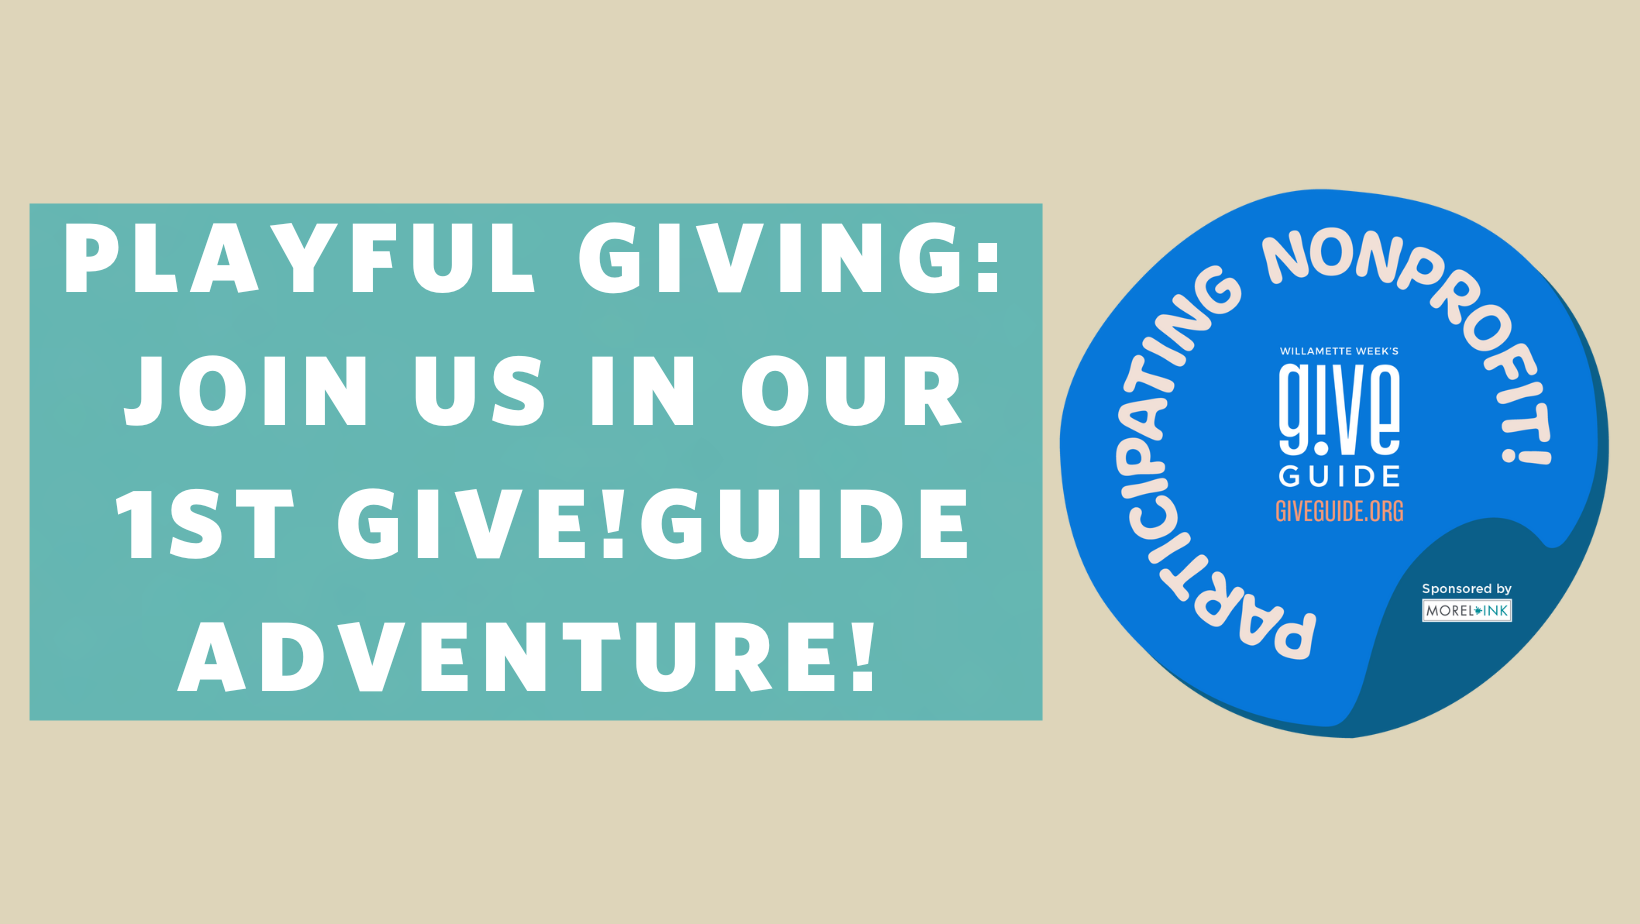 A graphic branded with the Willamette Week Give!Guide logo that says “We are a participating nonprofit” and additional text that says “Playful Giving: Join Us in our 1st Give!Guide Adventure!”